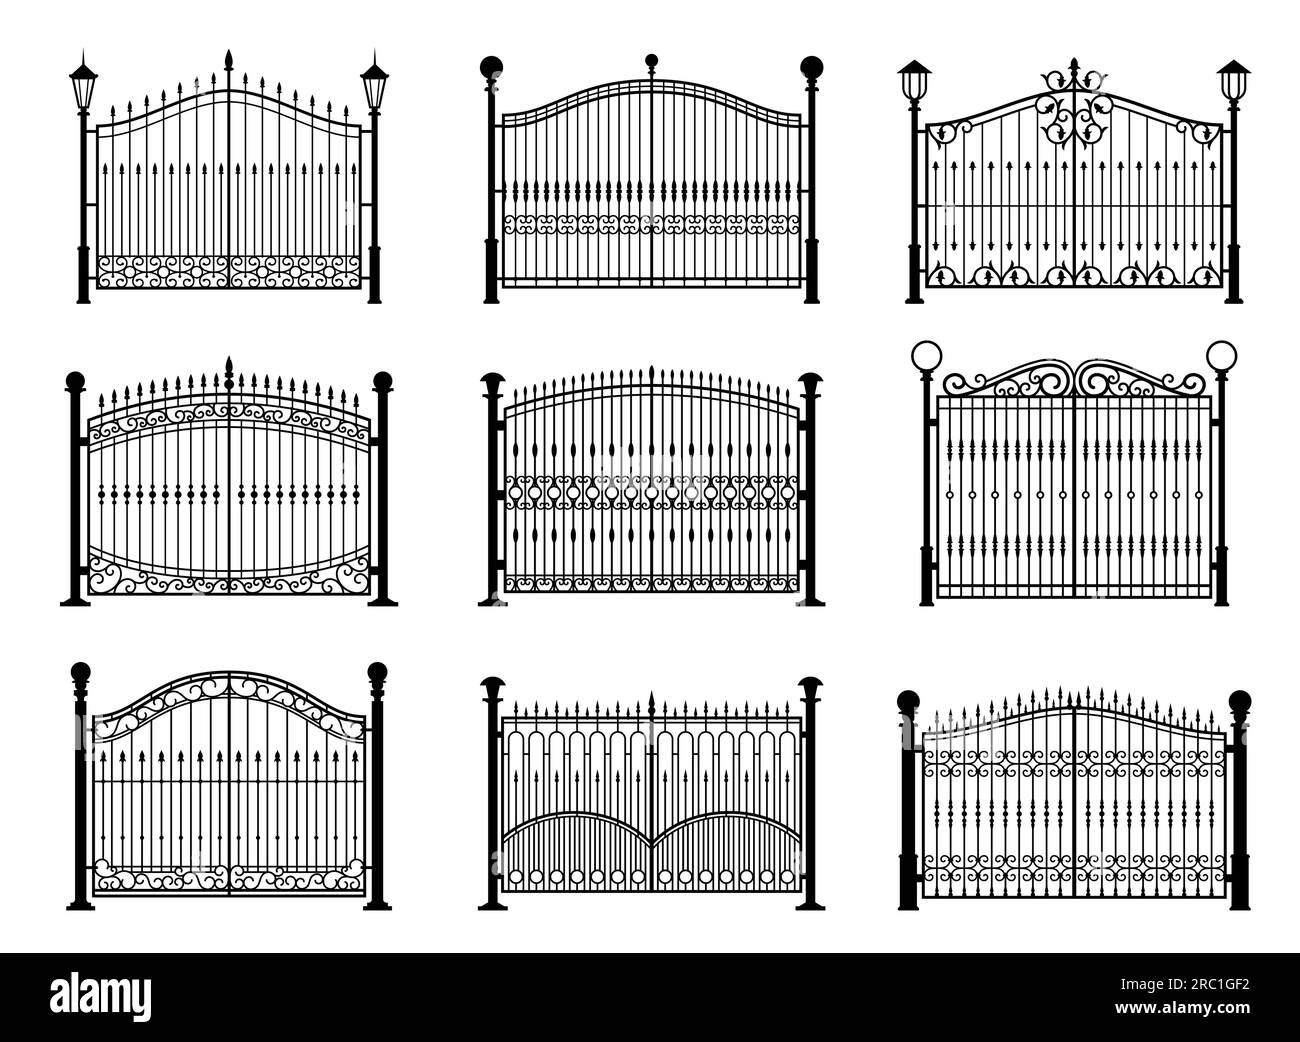 Iron gate, wrought metal fence, steel wrought door with ornate forgings. Vector antique garden or park entrance gates of black frames, grills and rails with forged ornaments, light poles and pillars Stock Vector